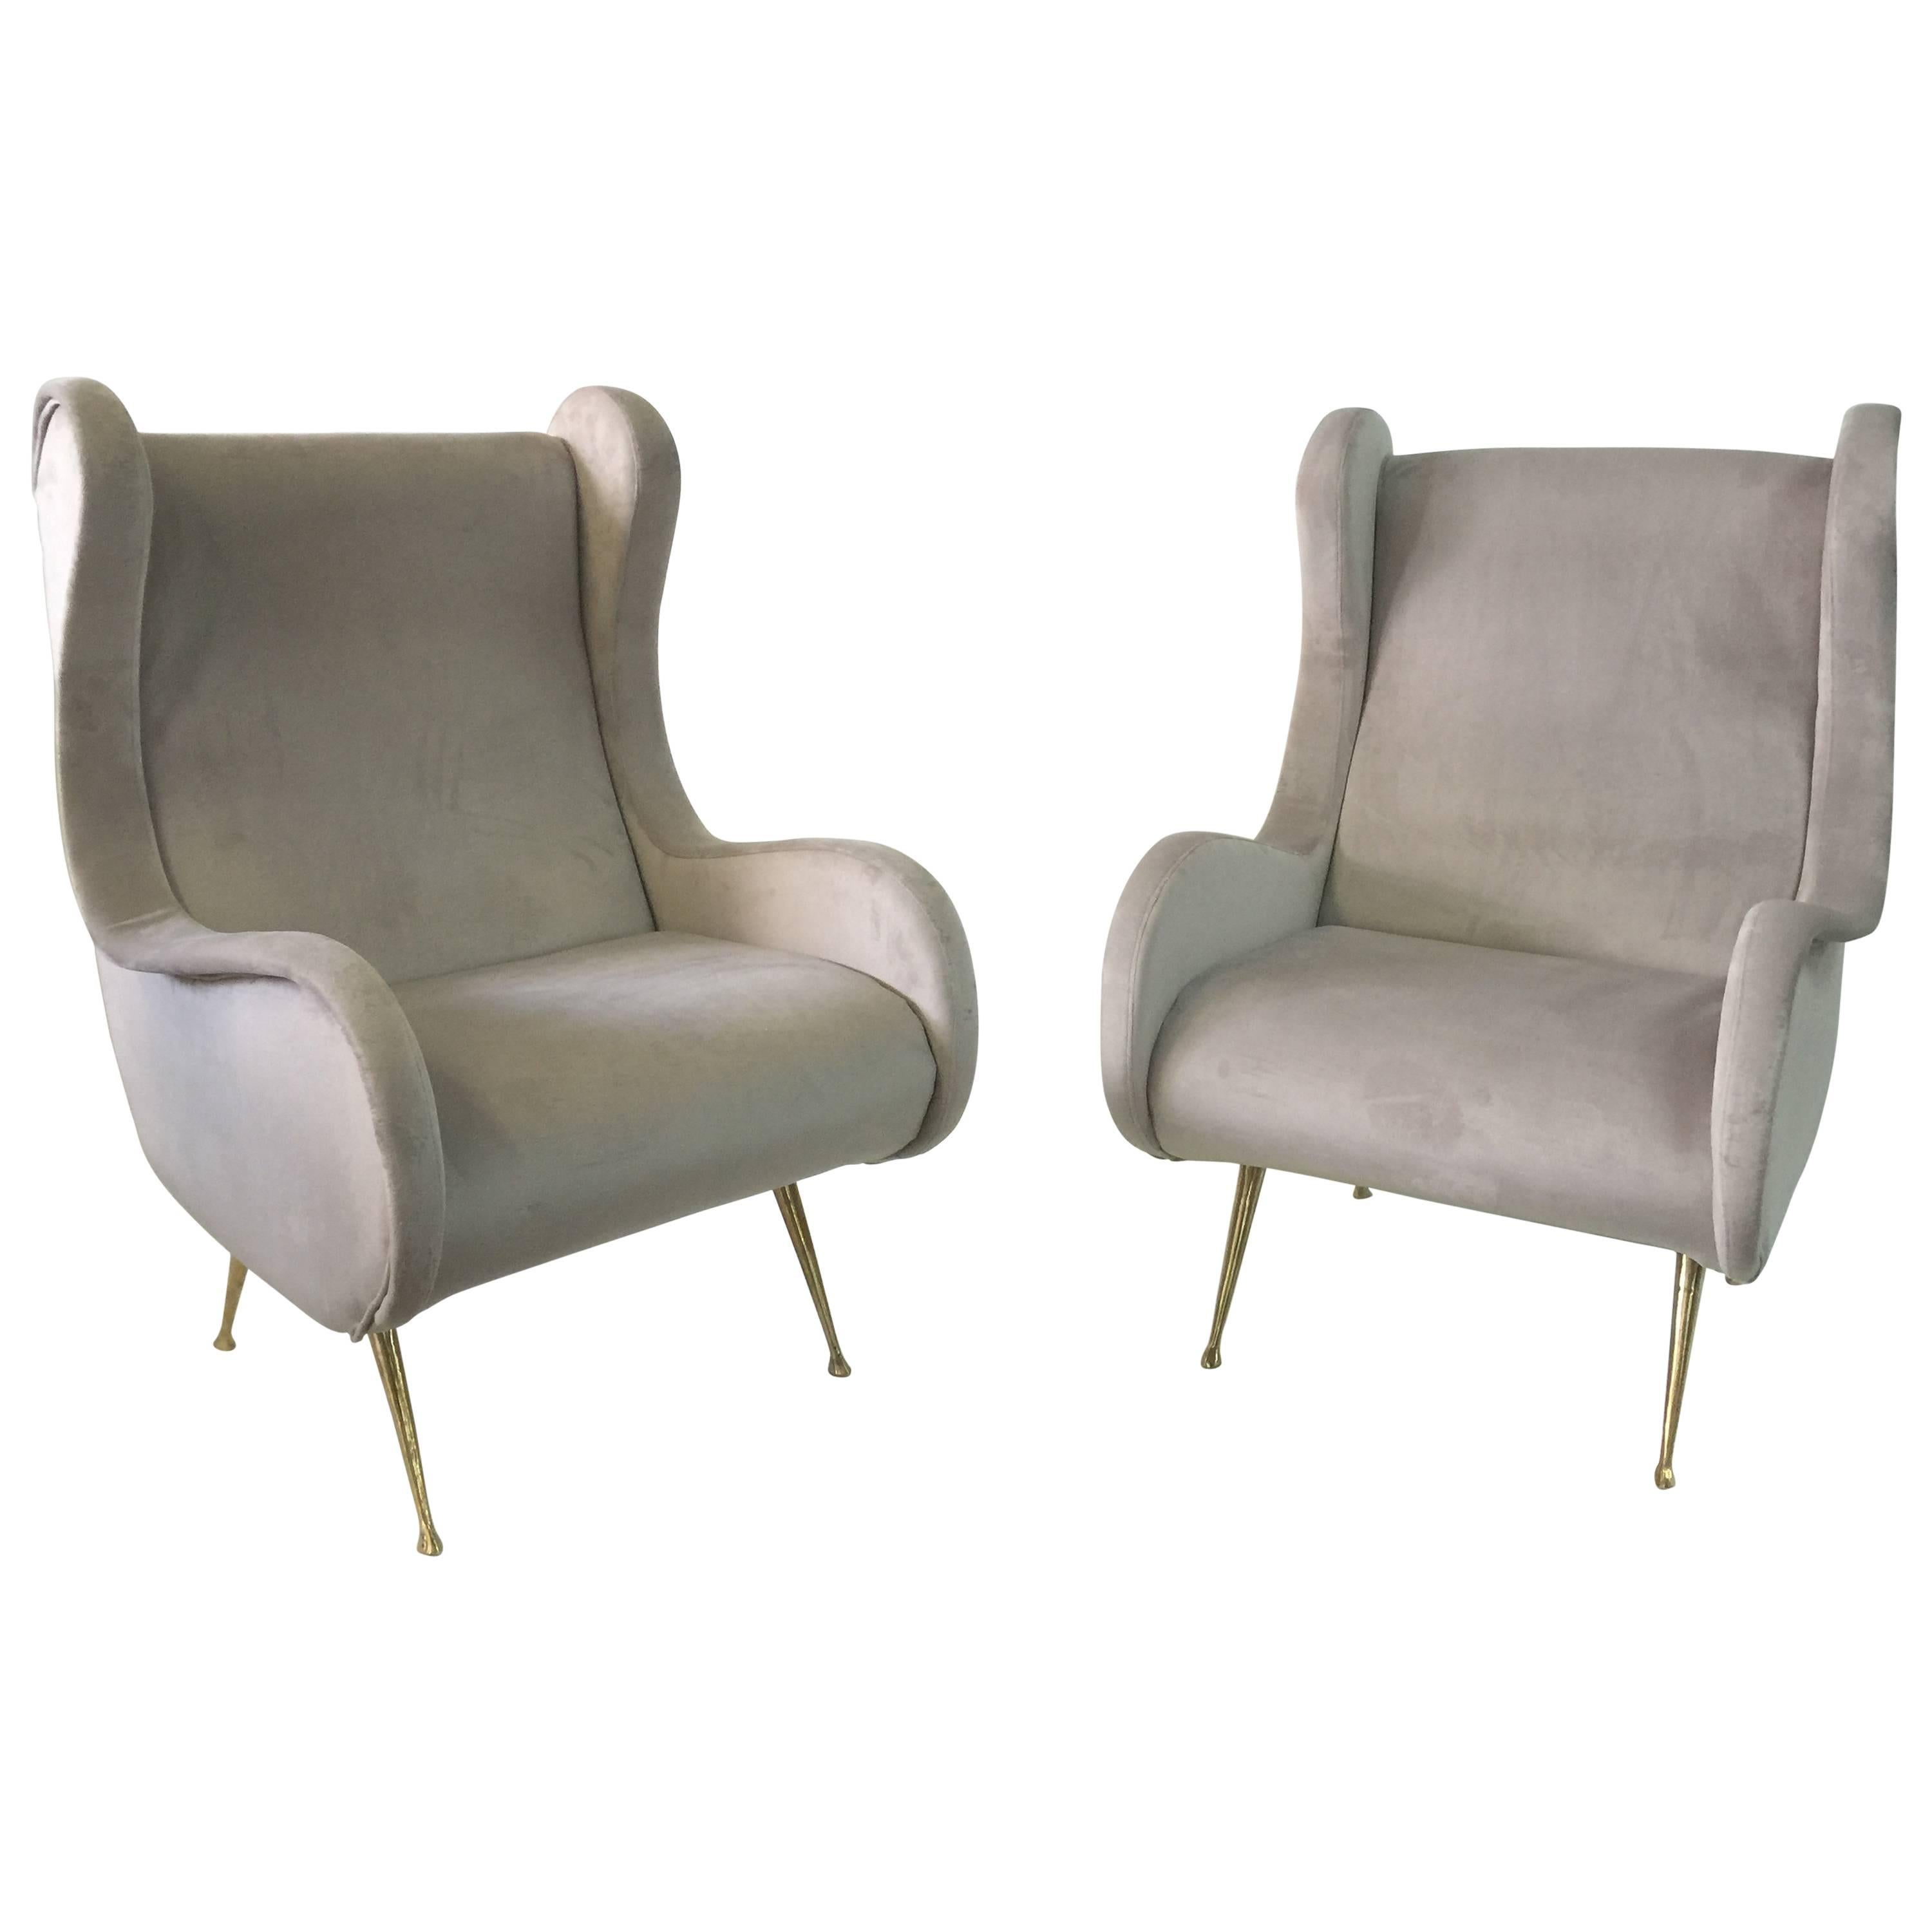 Zanuso Style Pair of Important Italian Winged Armchairs